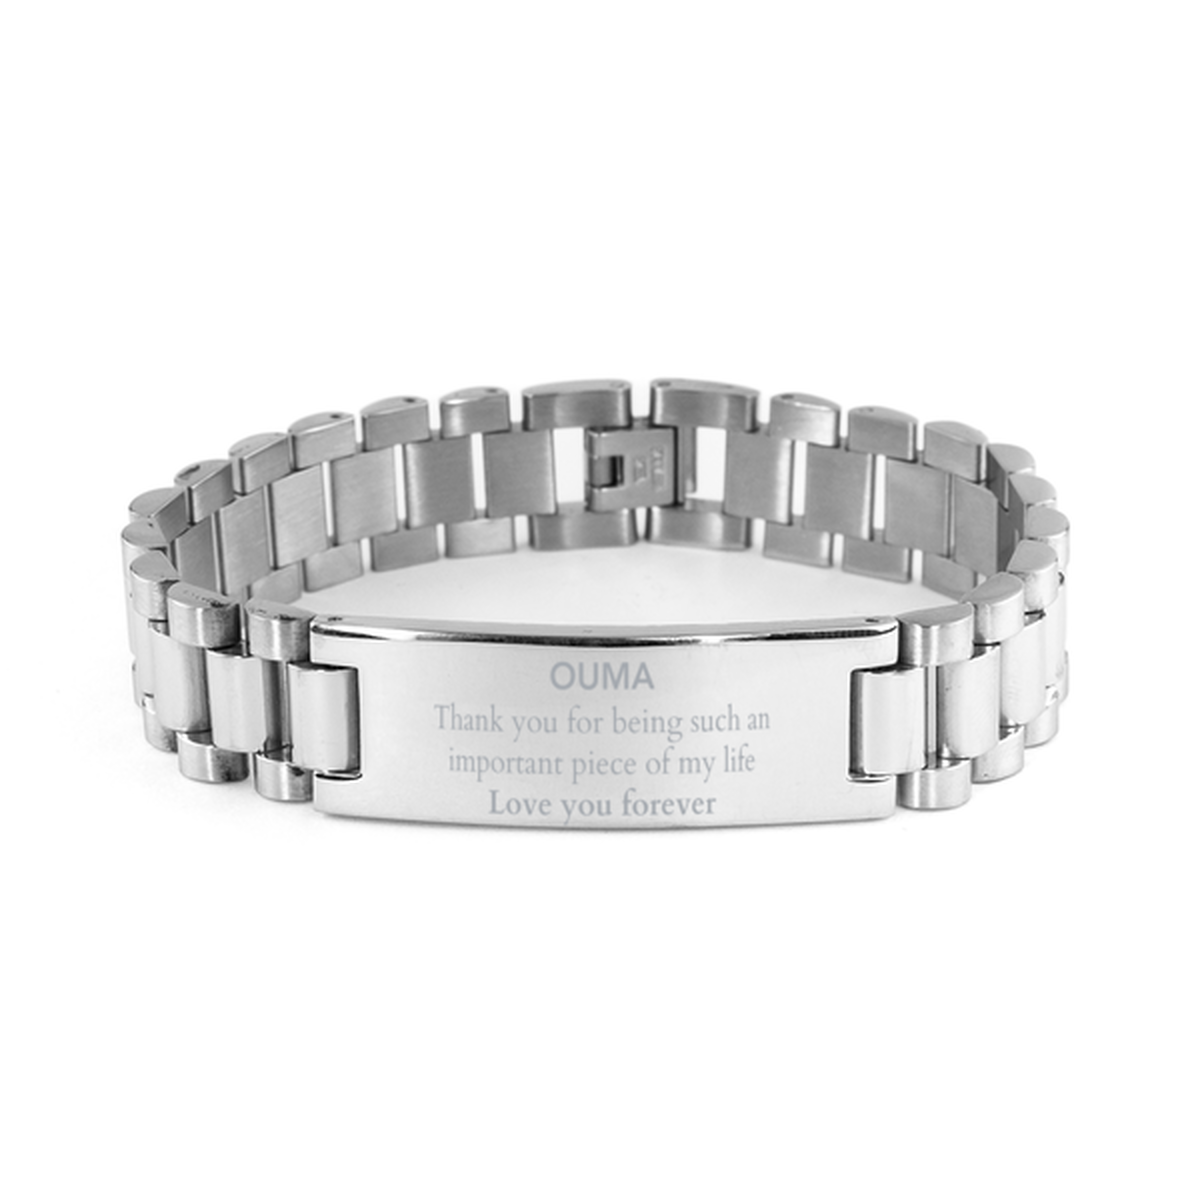 Appropriate Ouma Ladder Stainless Steel Bracelet Epic Birthday Gifts for Ouma Thank you for being such an important piece of my life Ouma Christmas Mothers Fathers Day